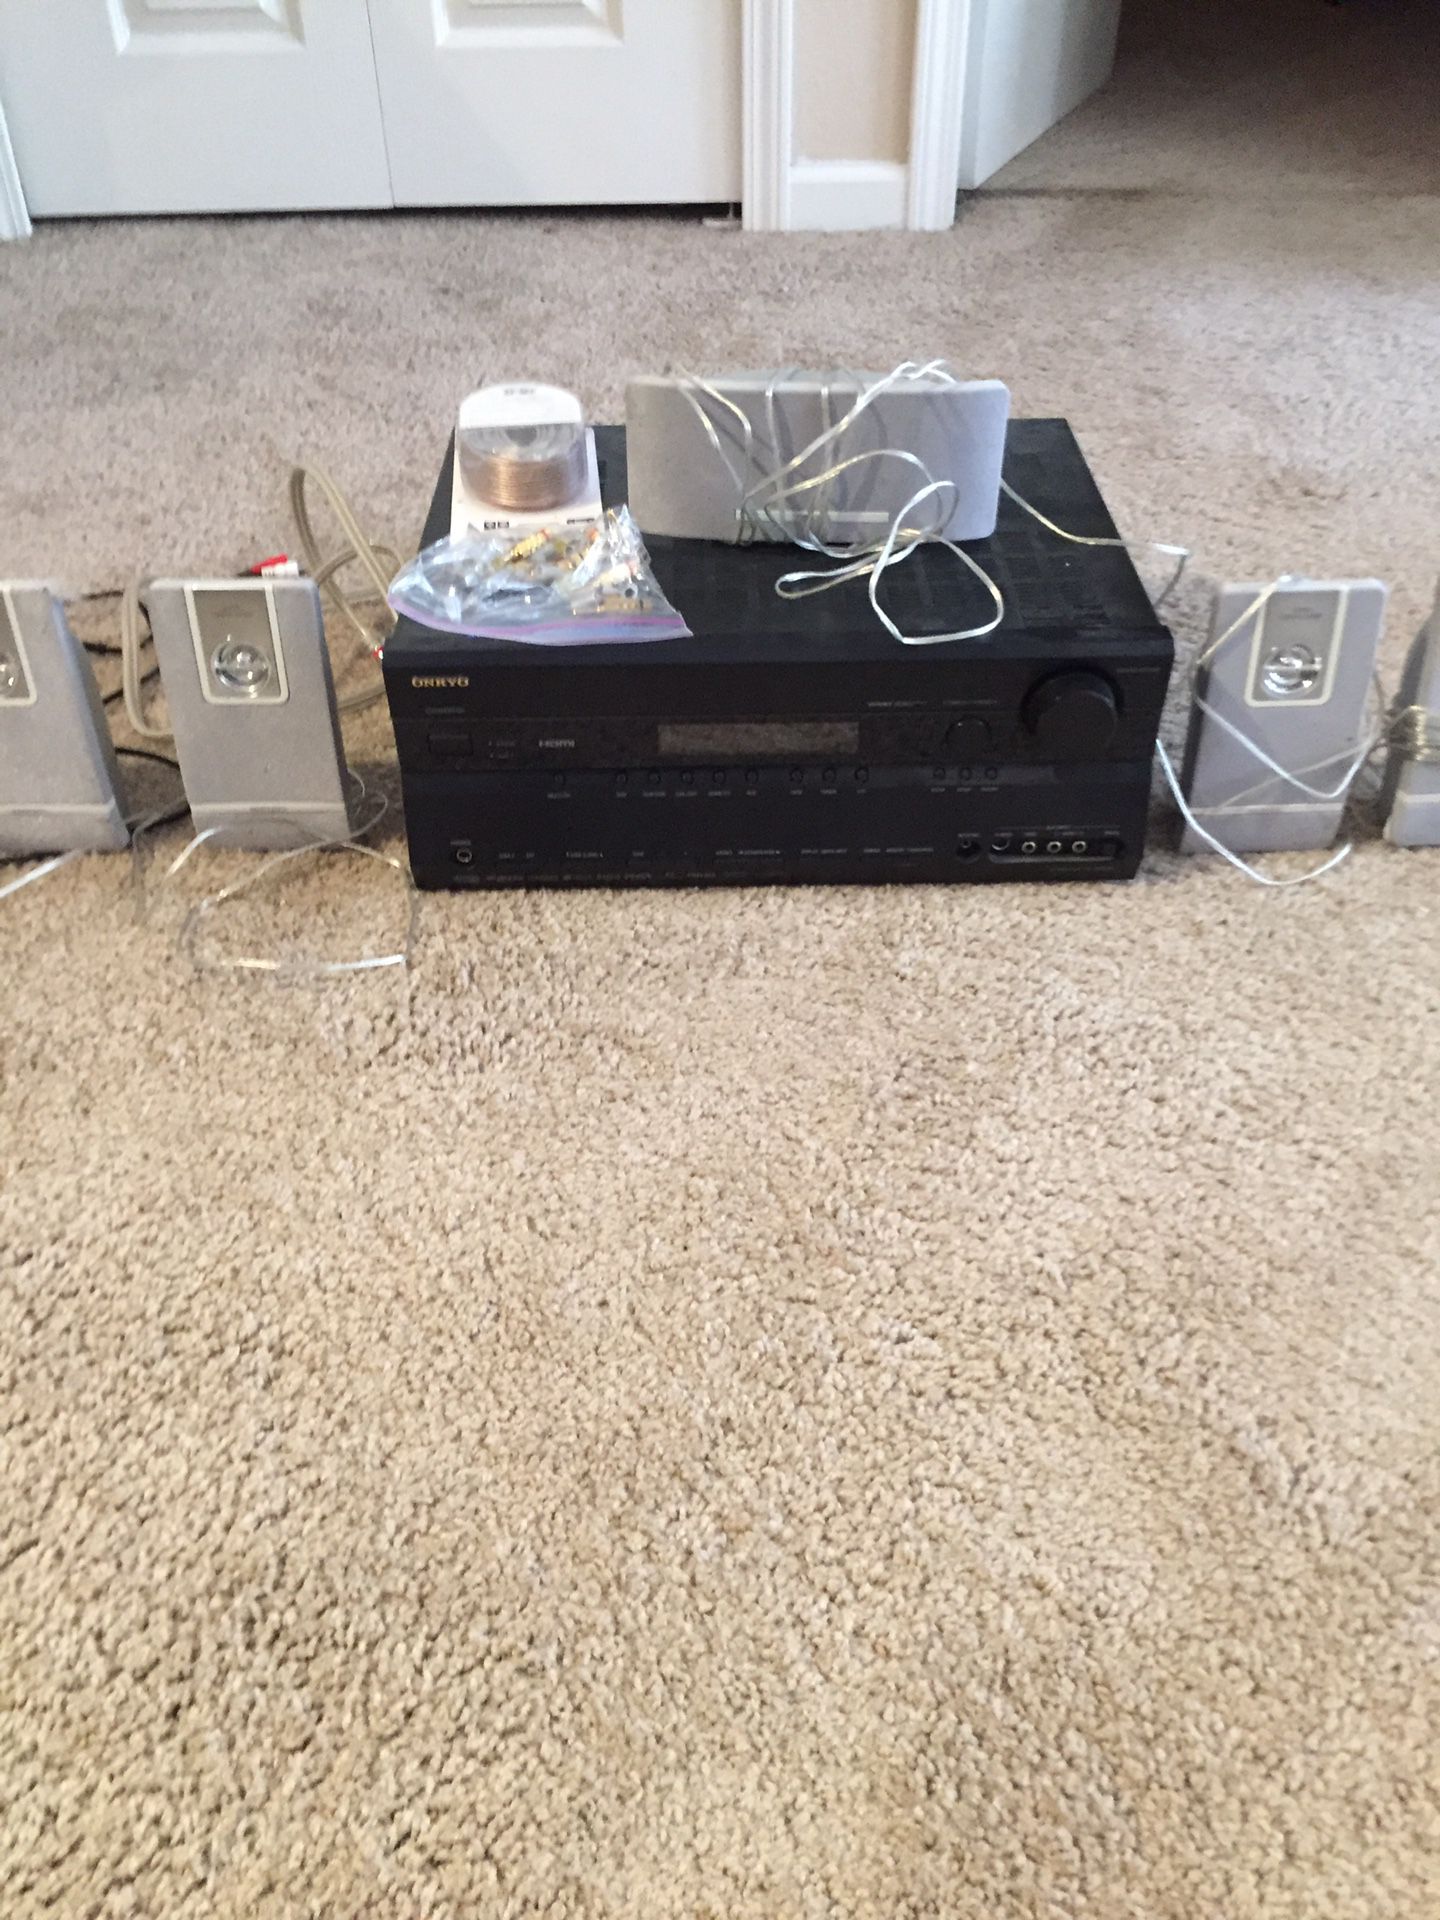 Phillips speakers and Onkyo receiver